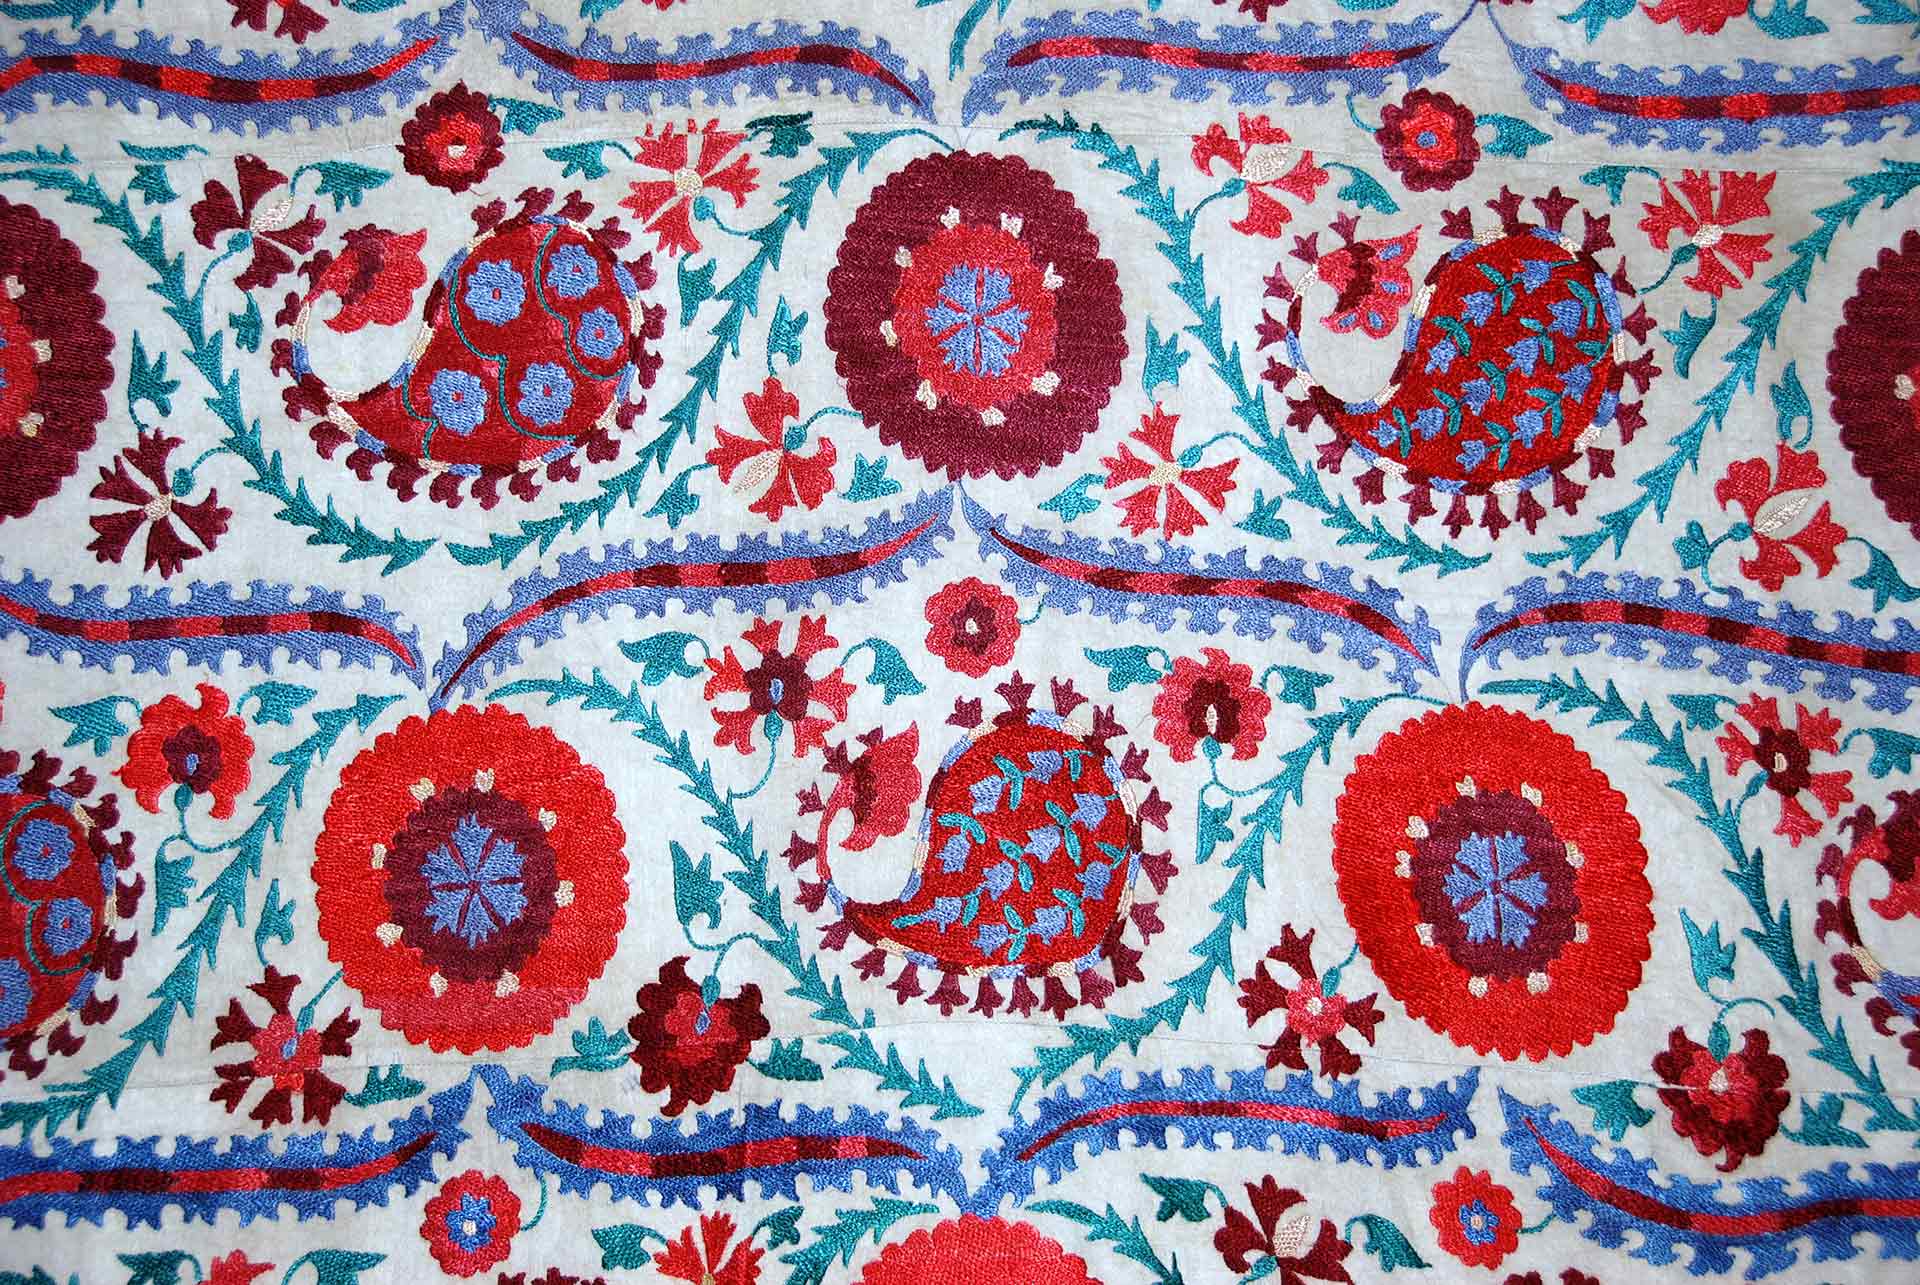 Suzane uzbek pattern carpet, spread in Central Asia, traditional textile product